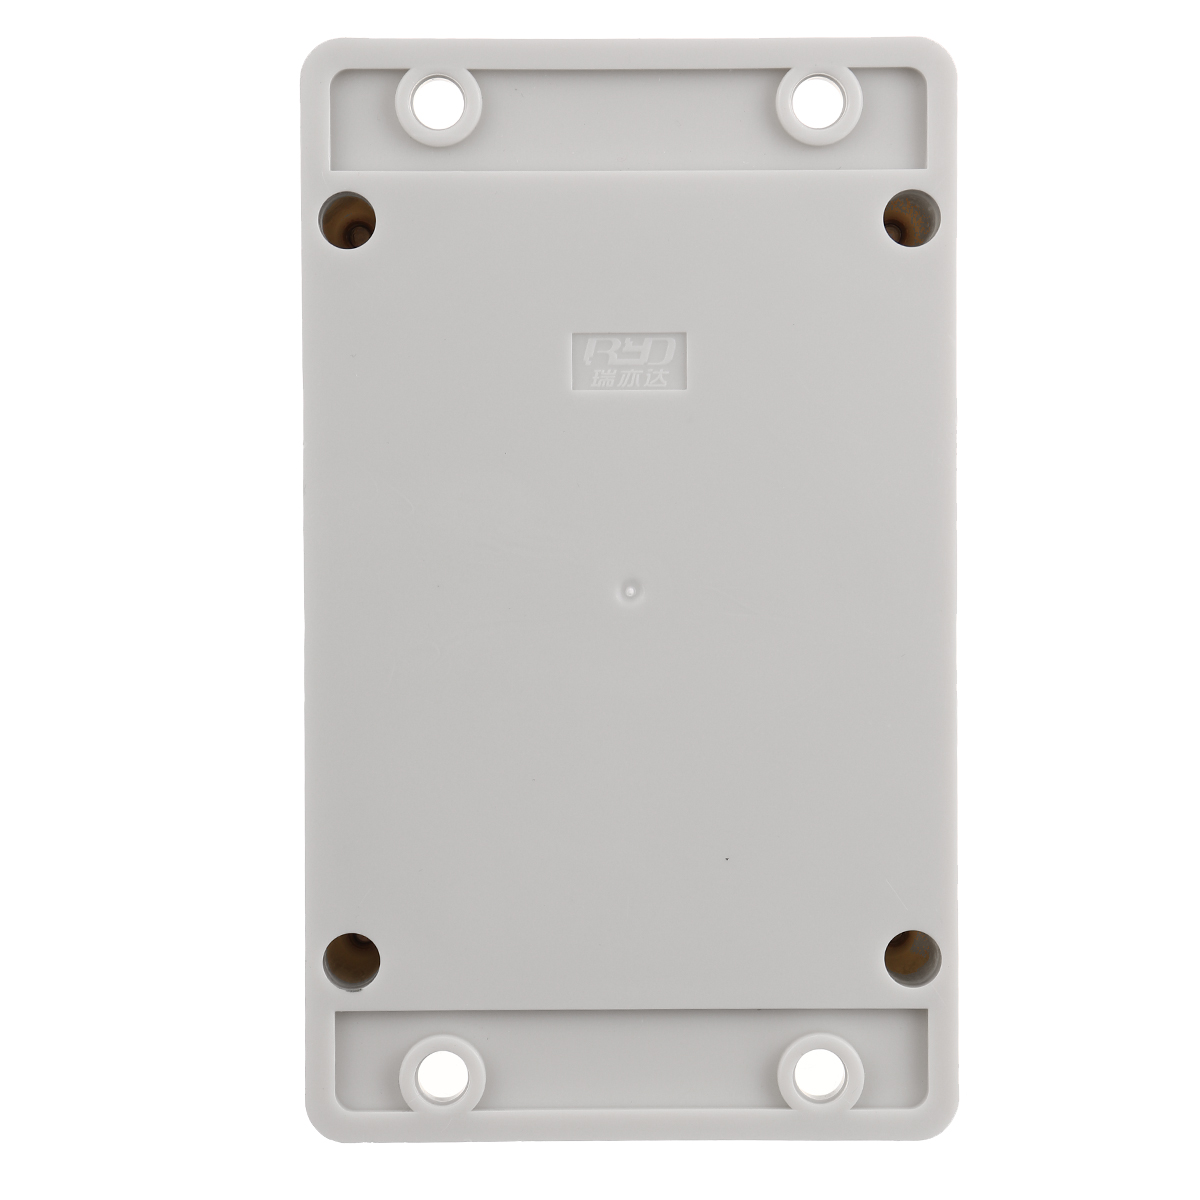 Waterproof-Plastic-Enclosure-Box-Electronic-Project-Case-Electrical-Project-Box-Outdoor-Junction-Box-1678840-8